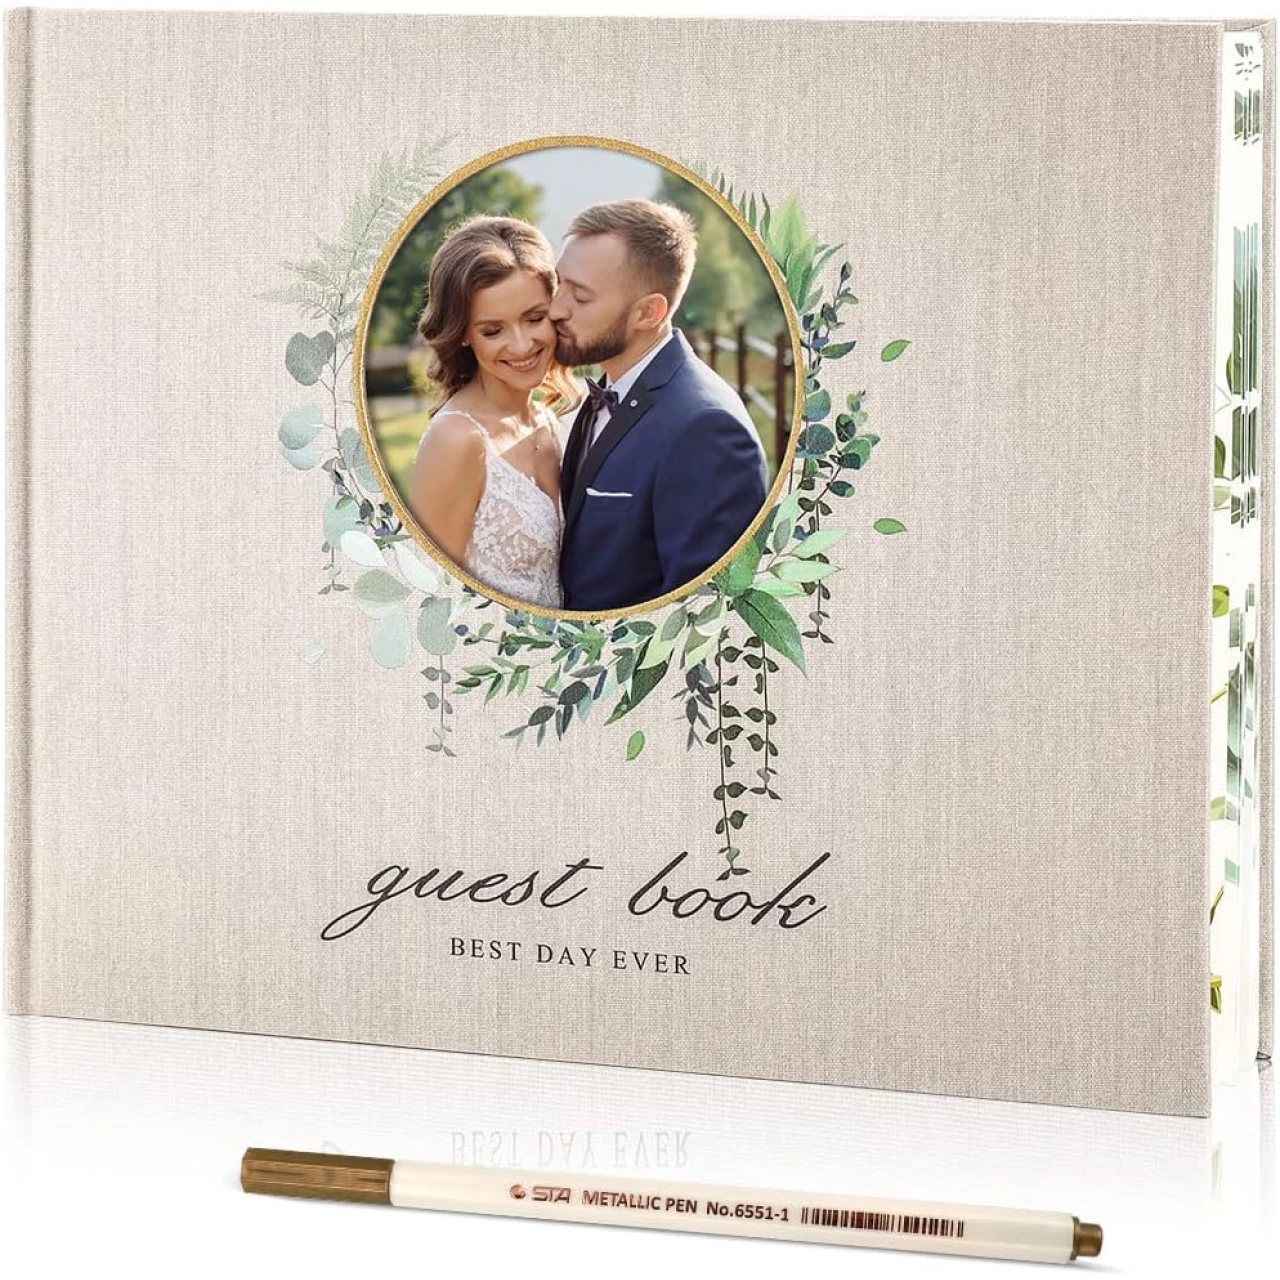 Wedding Guest Book Polaroid Guest Book Wedding Reception 100 Pages Thick Paper Hardcover 8&quot; x 10&quot; Personalized Wedding Guest Book Alternative Baby Shower, Birthday, Graduation Party with Markers Pen (Light Gray, 8&quot; x 10&quot;)